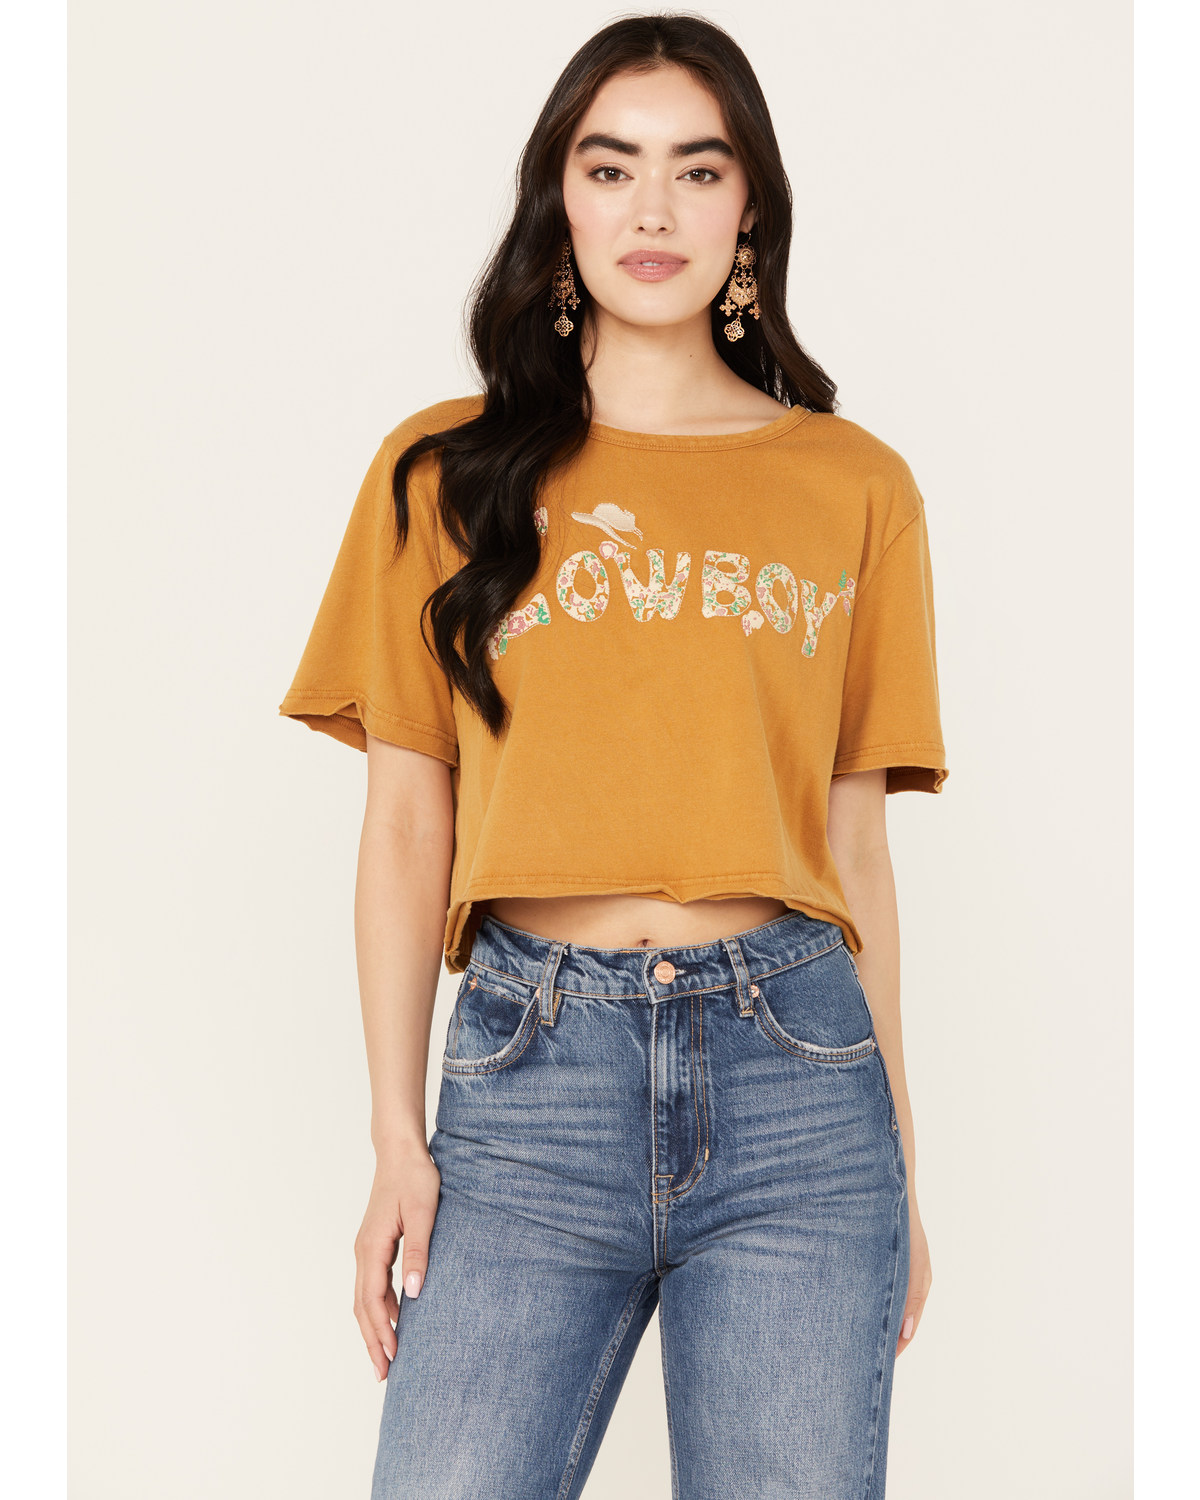 Miss Me Women's Boxy Fit Cowboy Short Sleeve Cropped Graphic Tee